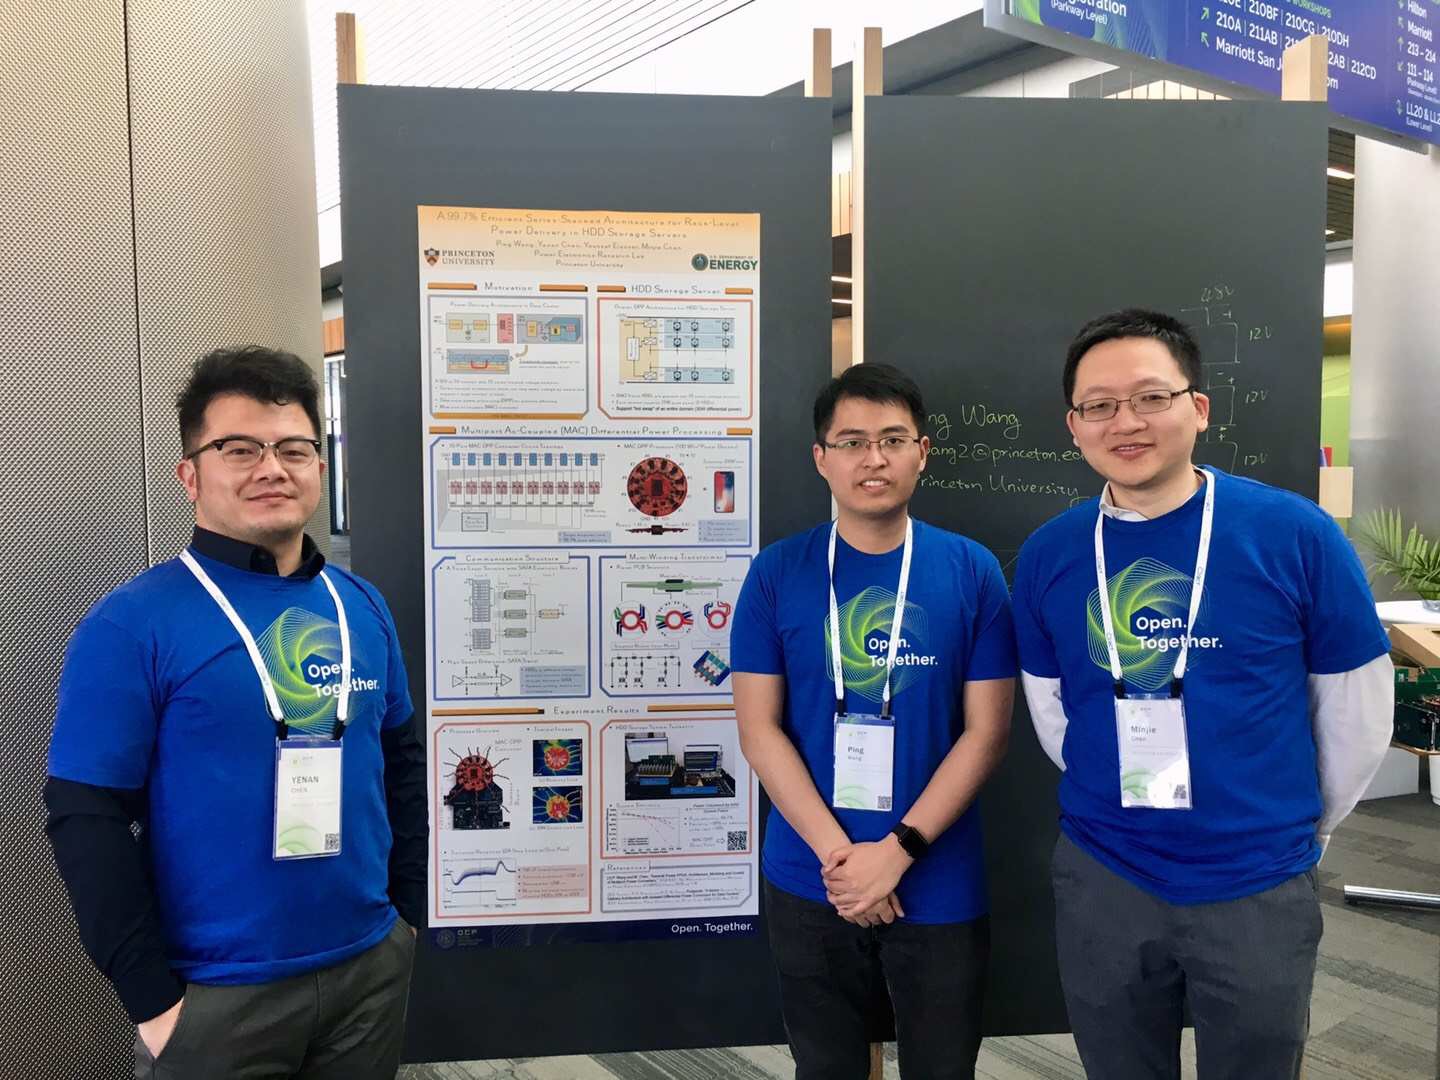 Attending Open Compute Project at San Jose 2019